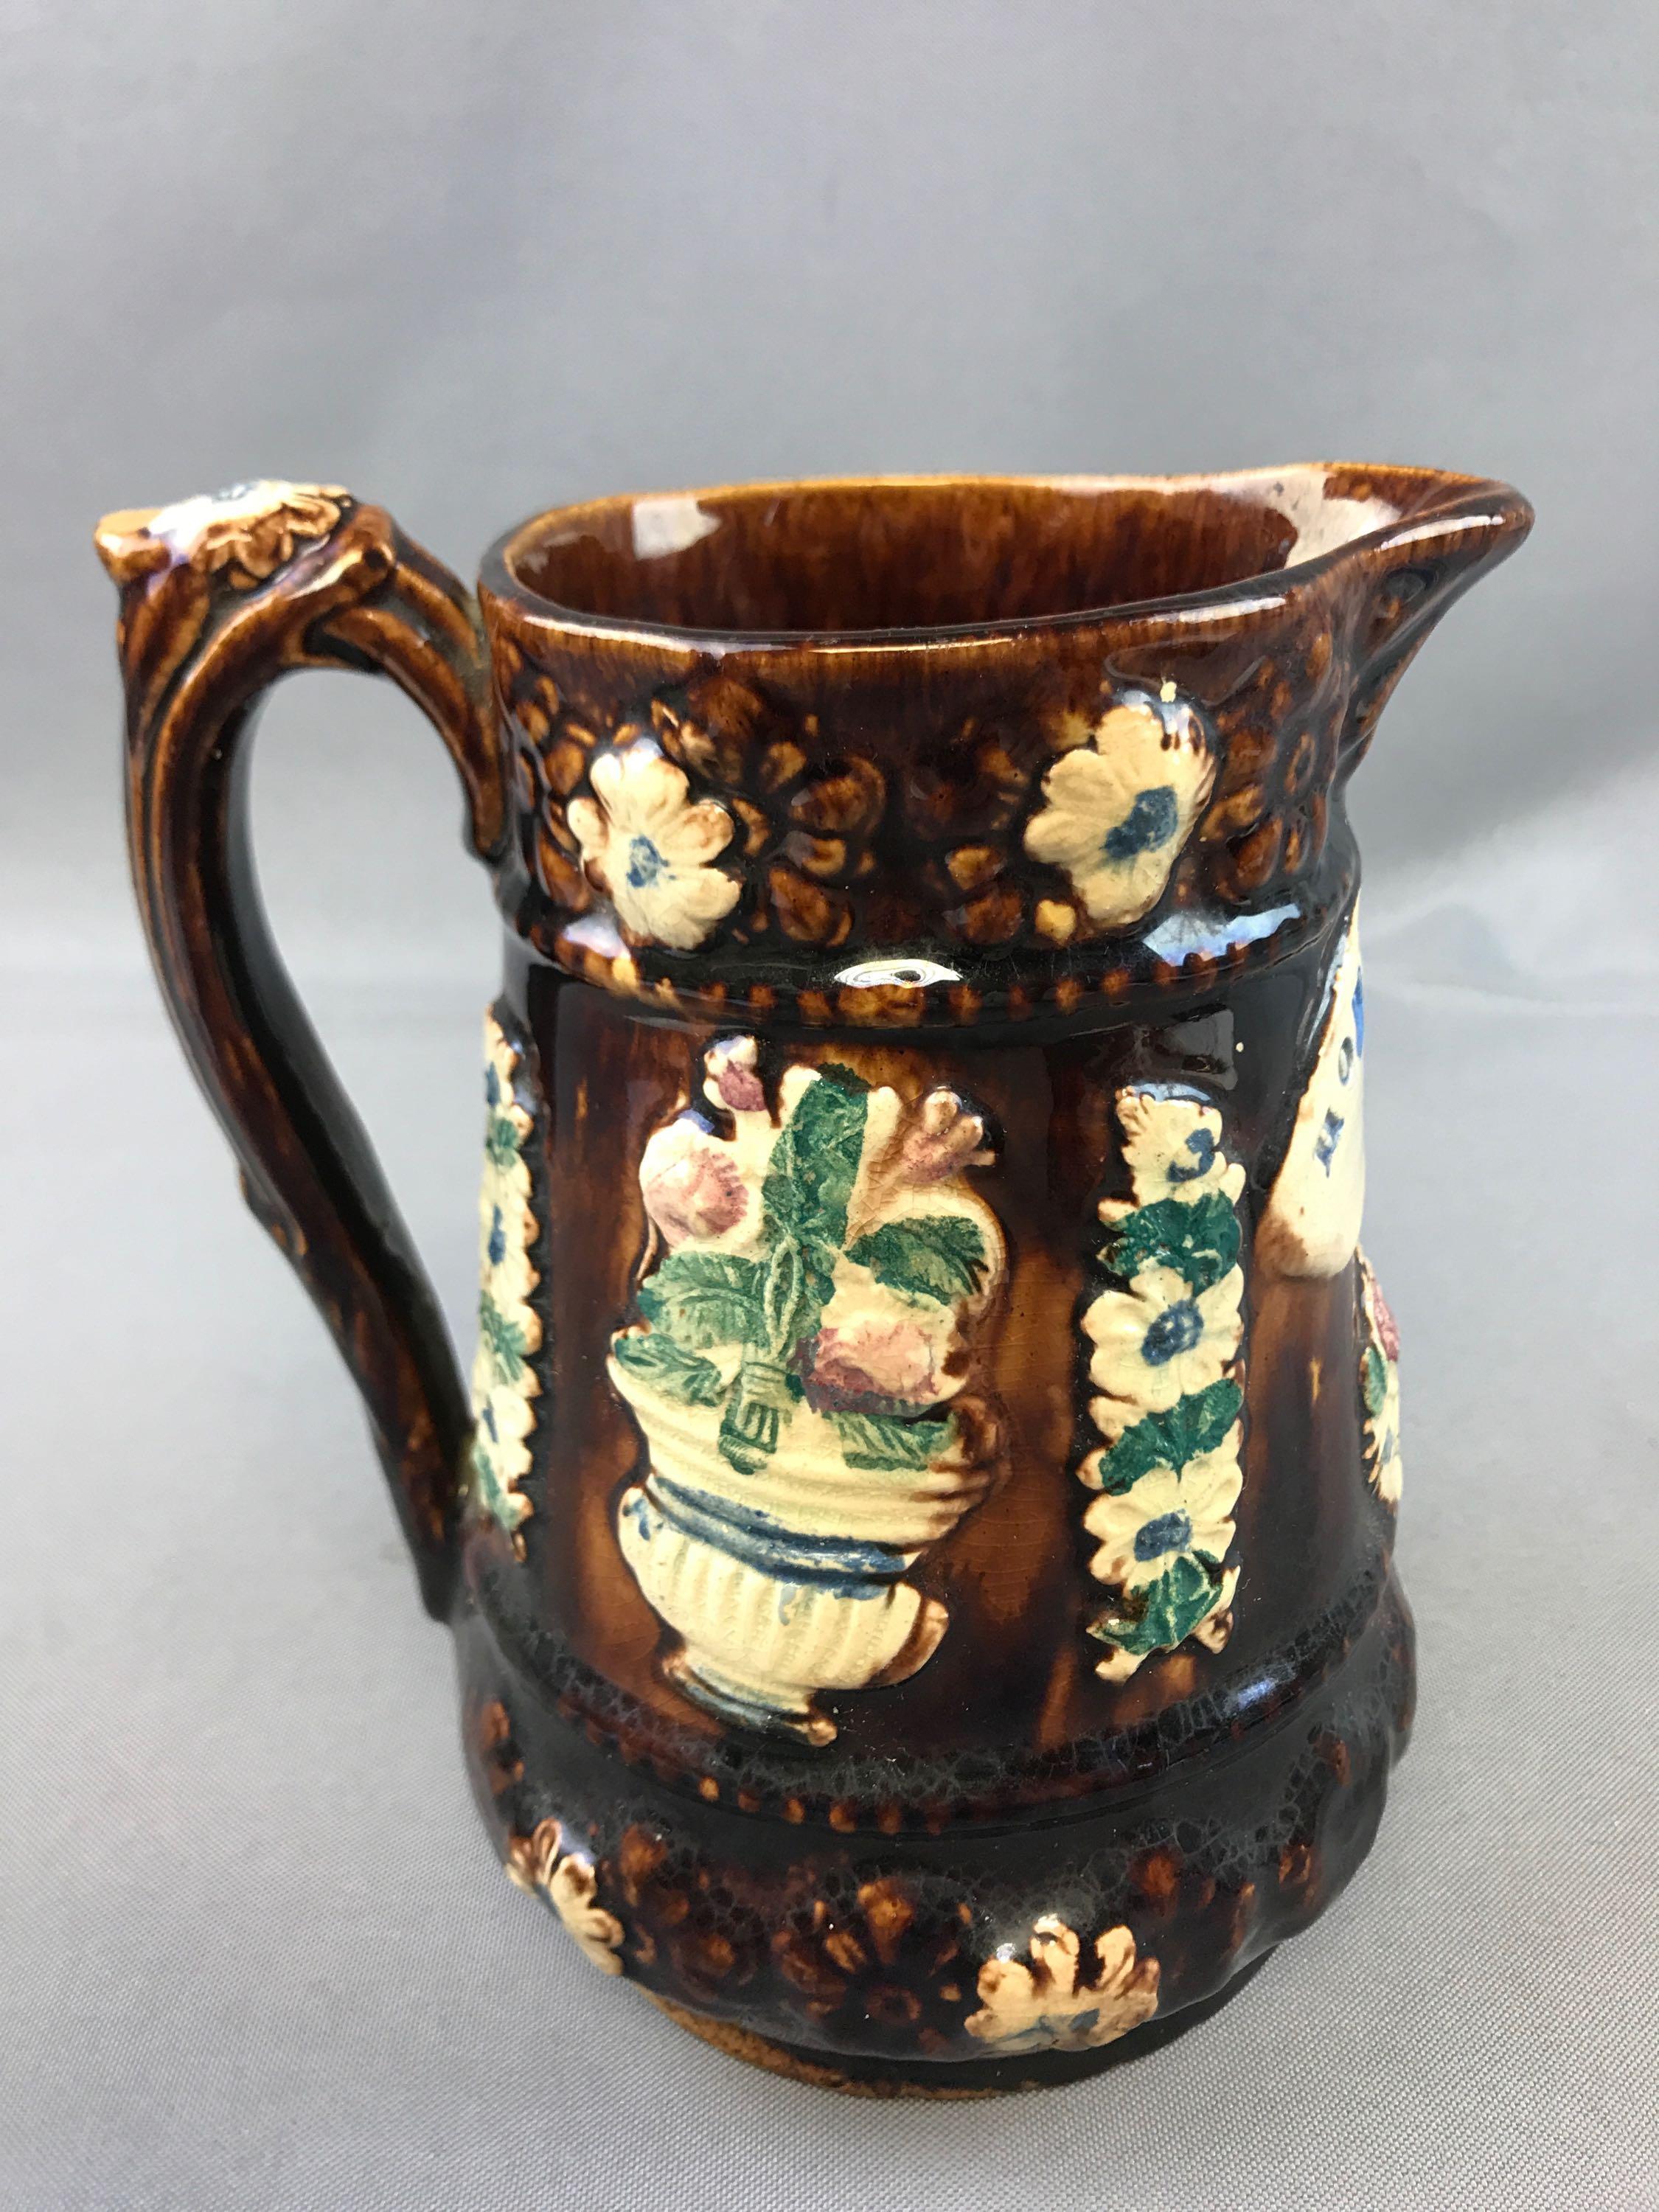 Antique (1900s) Barge Ware Pottery Pitcher - "Home Sweet Home"